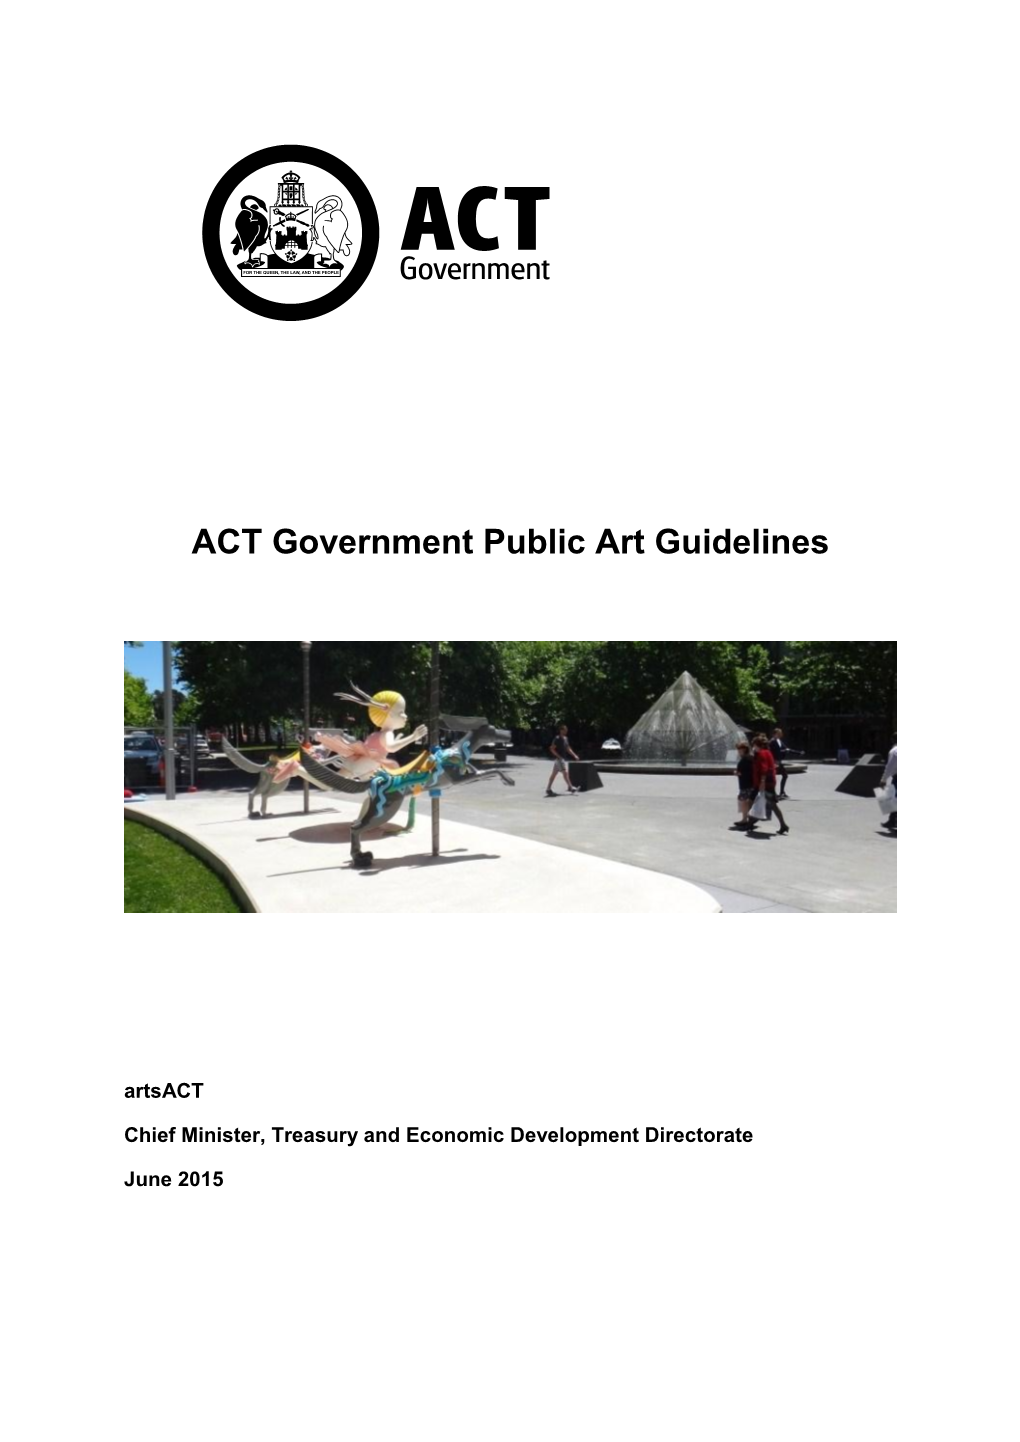 2015 ACT Government Public Art Guidelines